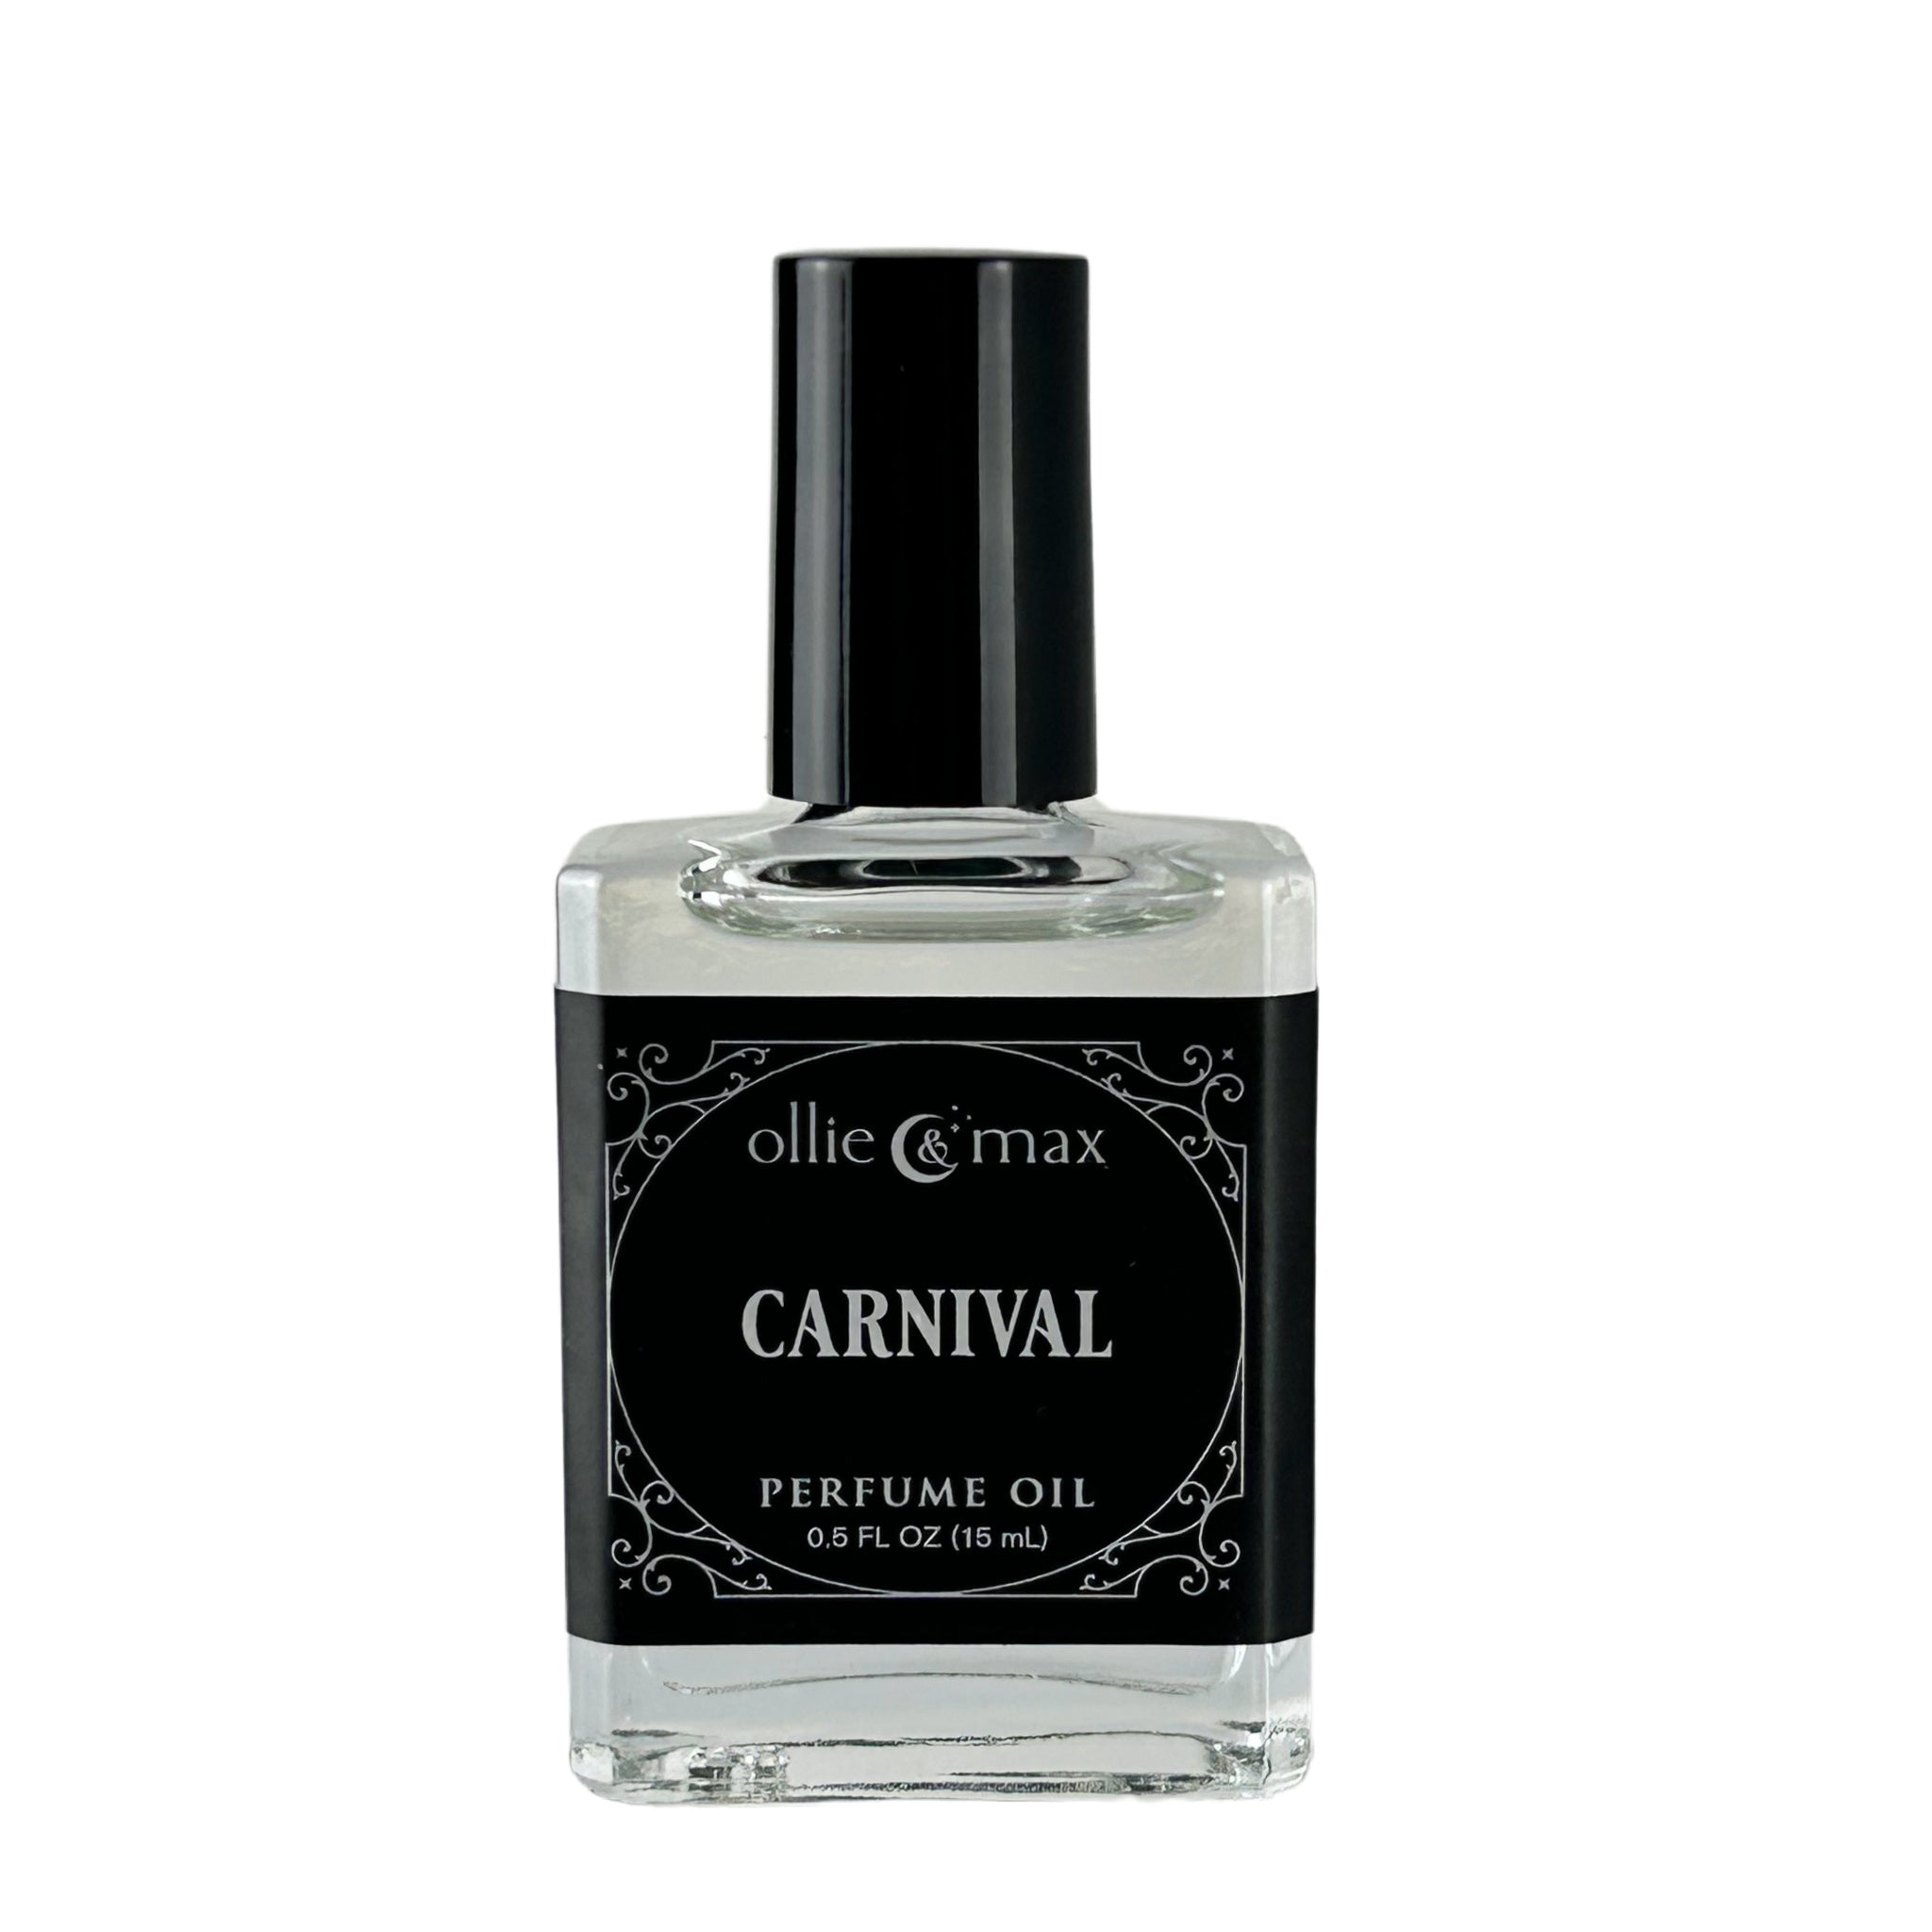 15ml rectangle glass bottle with tall black cap and black label. Carnival vegan perfume oil.